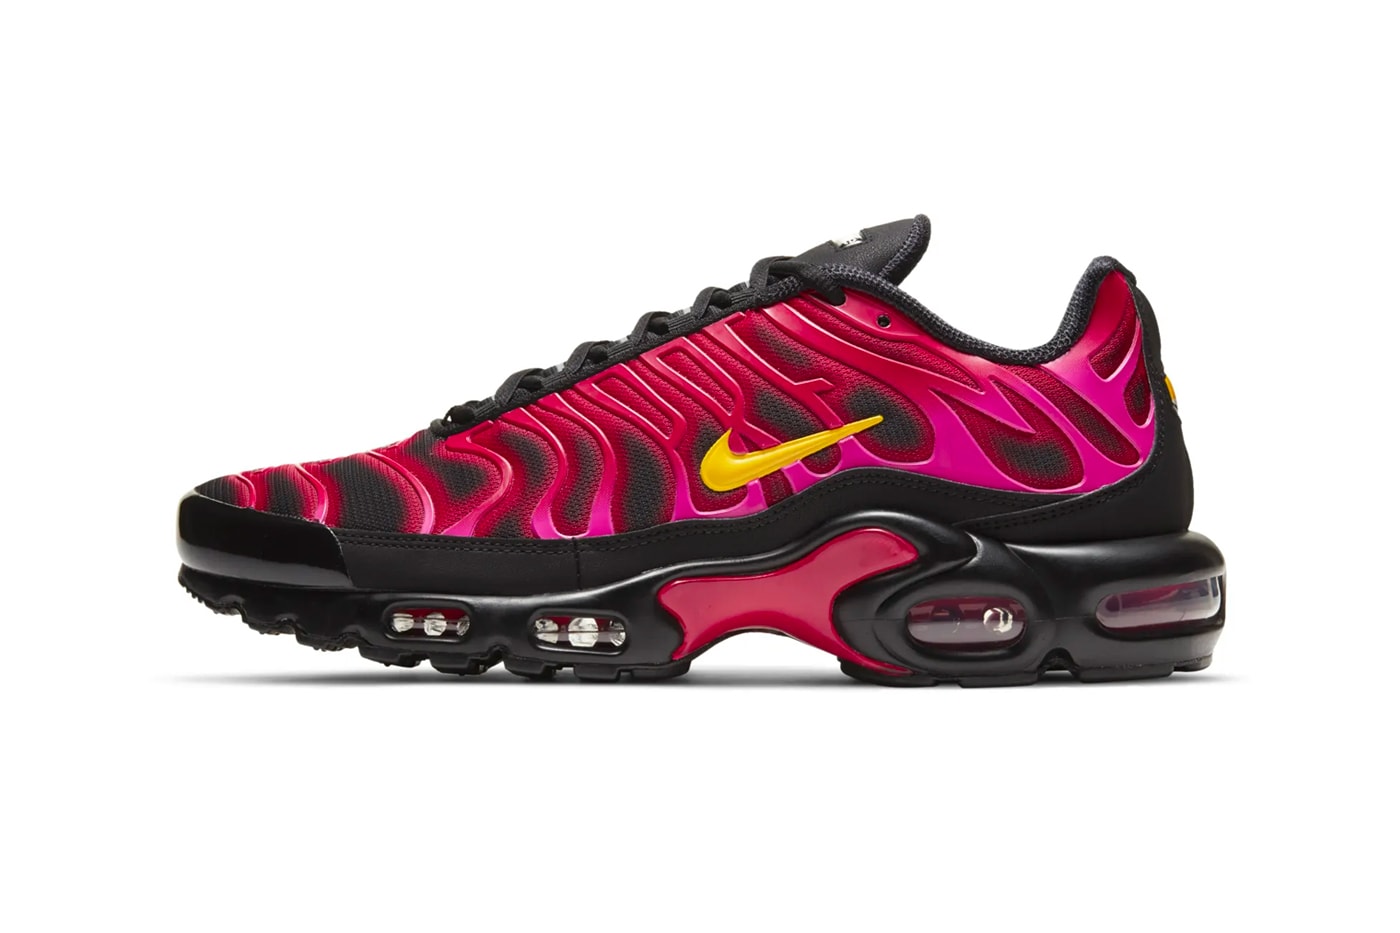 Air Max Plus x Supreme 'Mean Green' Release Date. Nike SNKRS